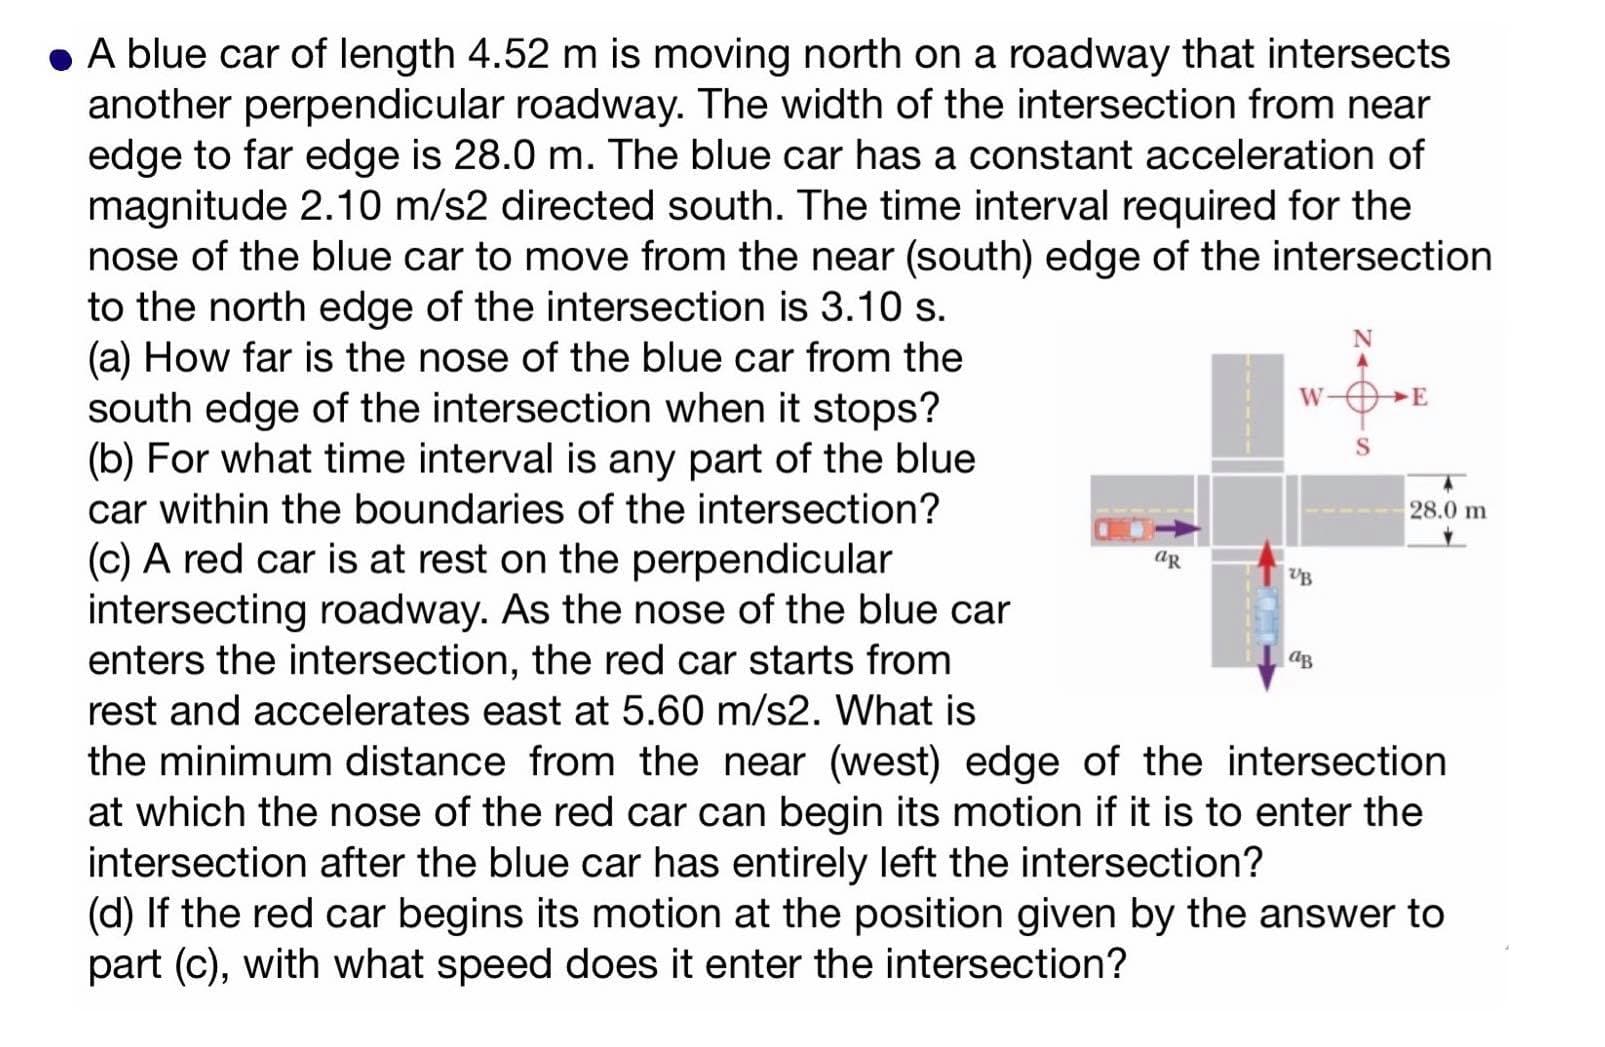 A blue car of length 4.52 m is moving north on a roadway that intersects
another perpendicular roadway. The width of the intersection from near
edge to far edge is 28.0 m. The blue car has a constant acceleration of
magnitude 2.10 m/s2 directed south. The time interval required for the
nose of the blue car to move from the near (south) edge of the intersection
to the north edge of the intersection is 3.10 s.
(a) How far is the nose of the blue car from the
south edge of the intersection when it stops?
(b) For what time interval is any part of the blue
car within the boundaries of the intersection?
W-OE
28.0 m
(c) A red car is at rest on the perpendicular
intersecting road way As the nose of the blue car
